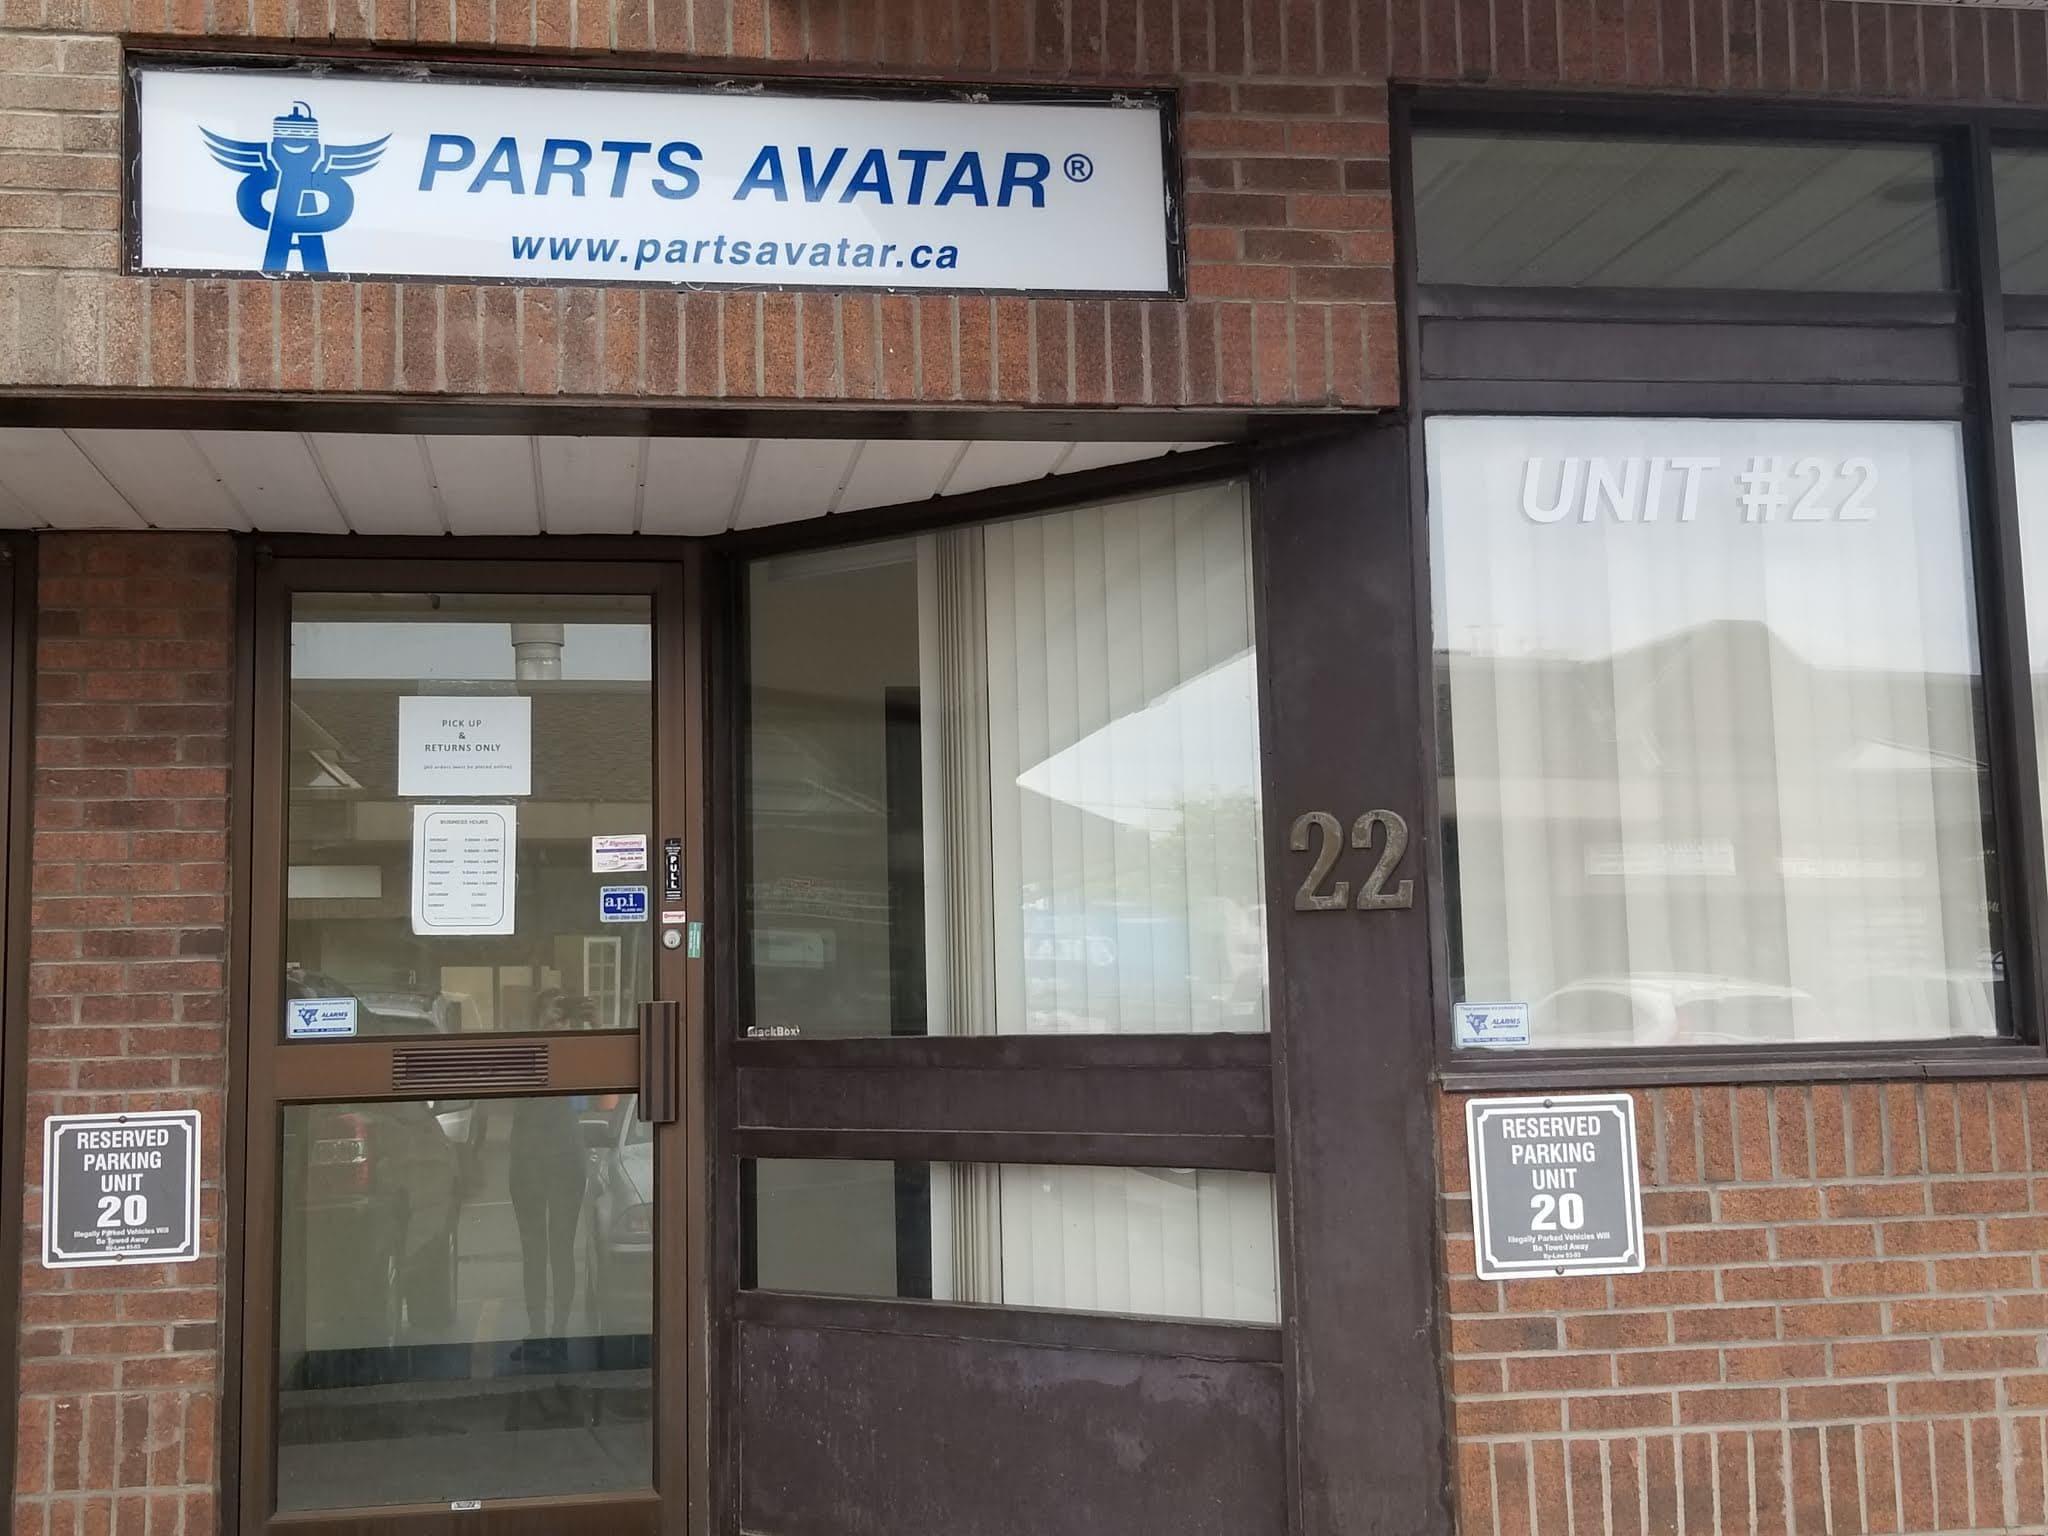 services-autoparts-commercial-delivery-across-canada-get-parts-at-lowest-price-for-shops-garage/images/autoparts-warehouse-partsavatar-brampton-gta.jpeg